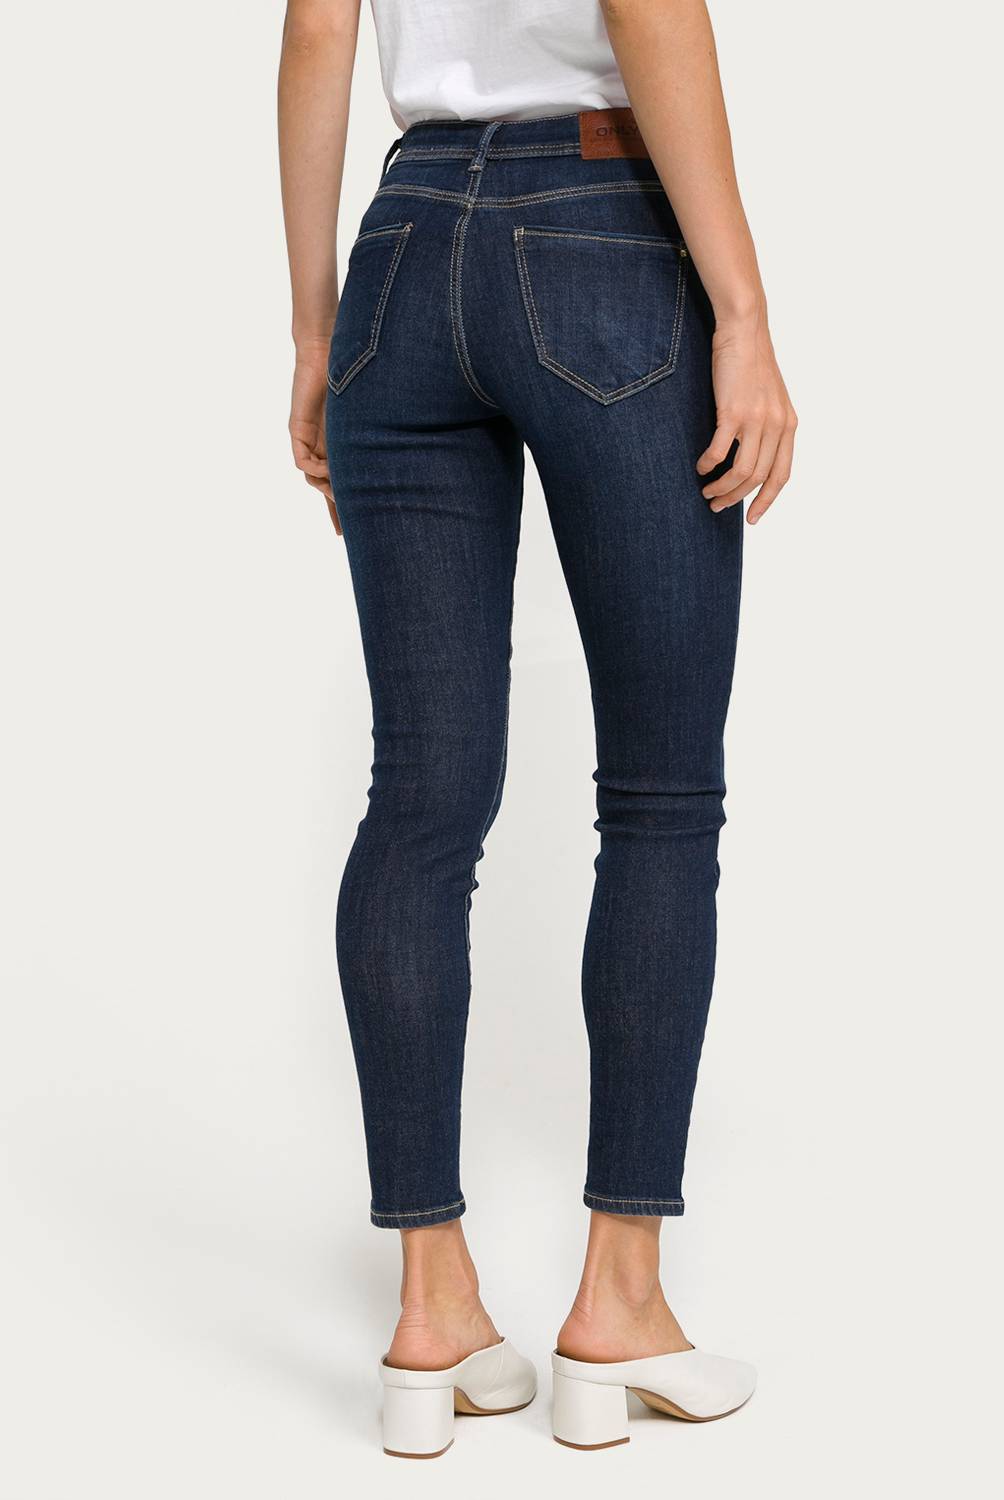 ONLY - Jeans Mujer